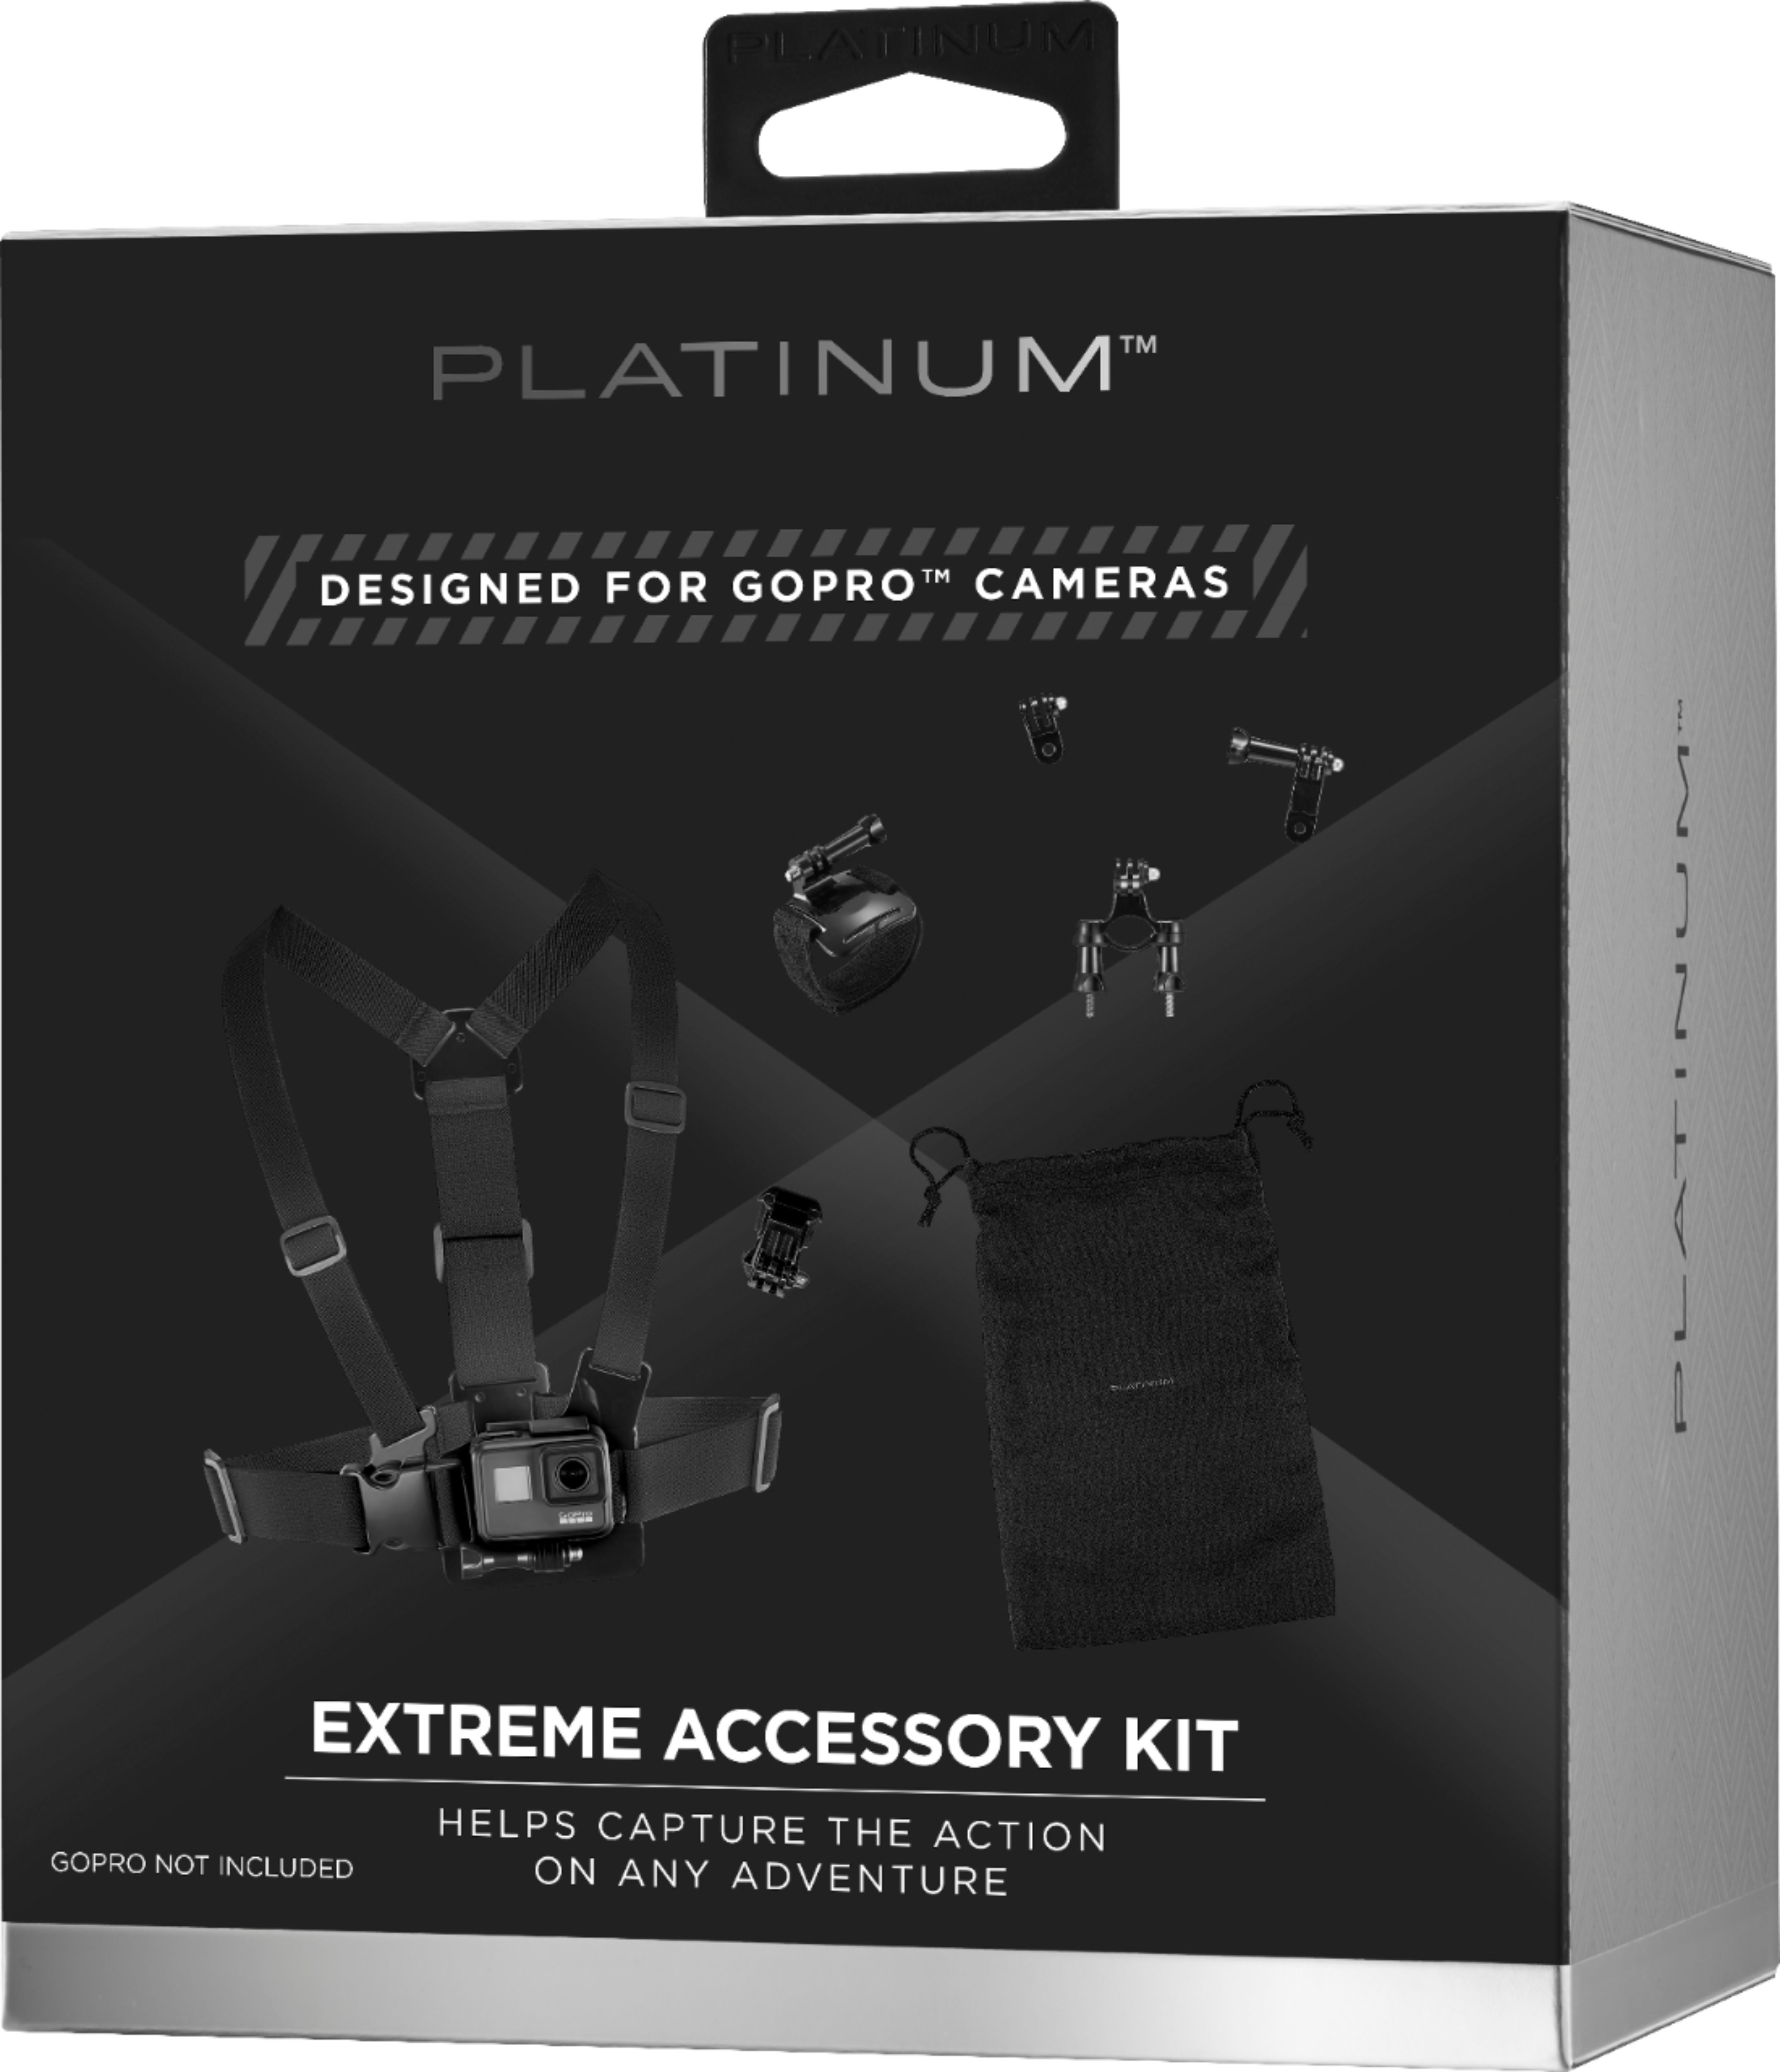 Platinum™ Extreme Accessory Kit for GoPro Action Cameras PT